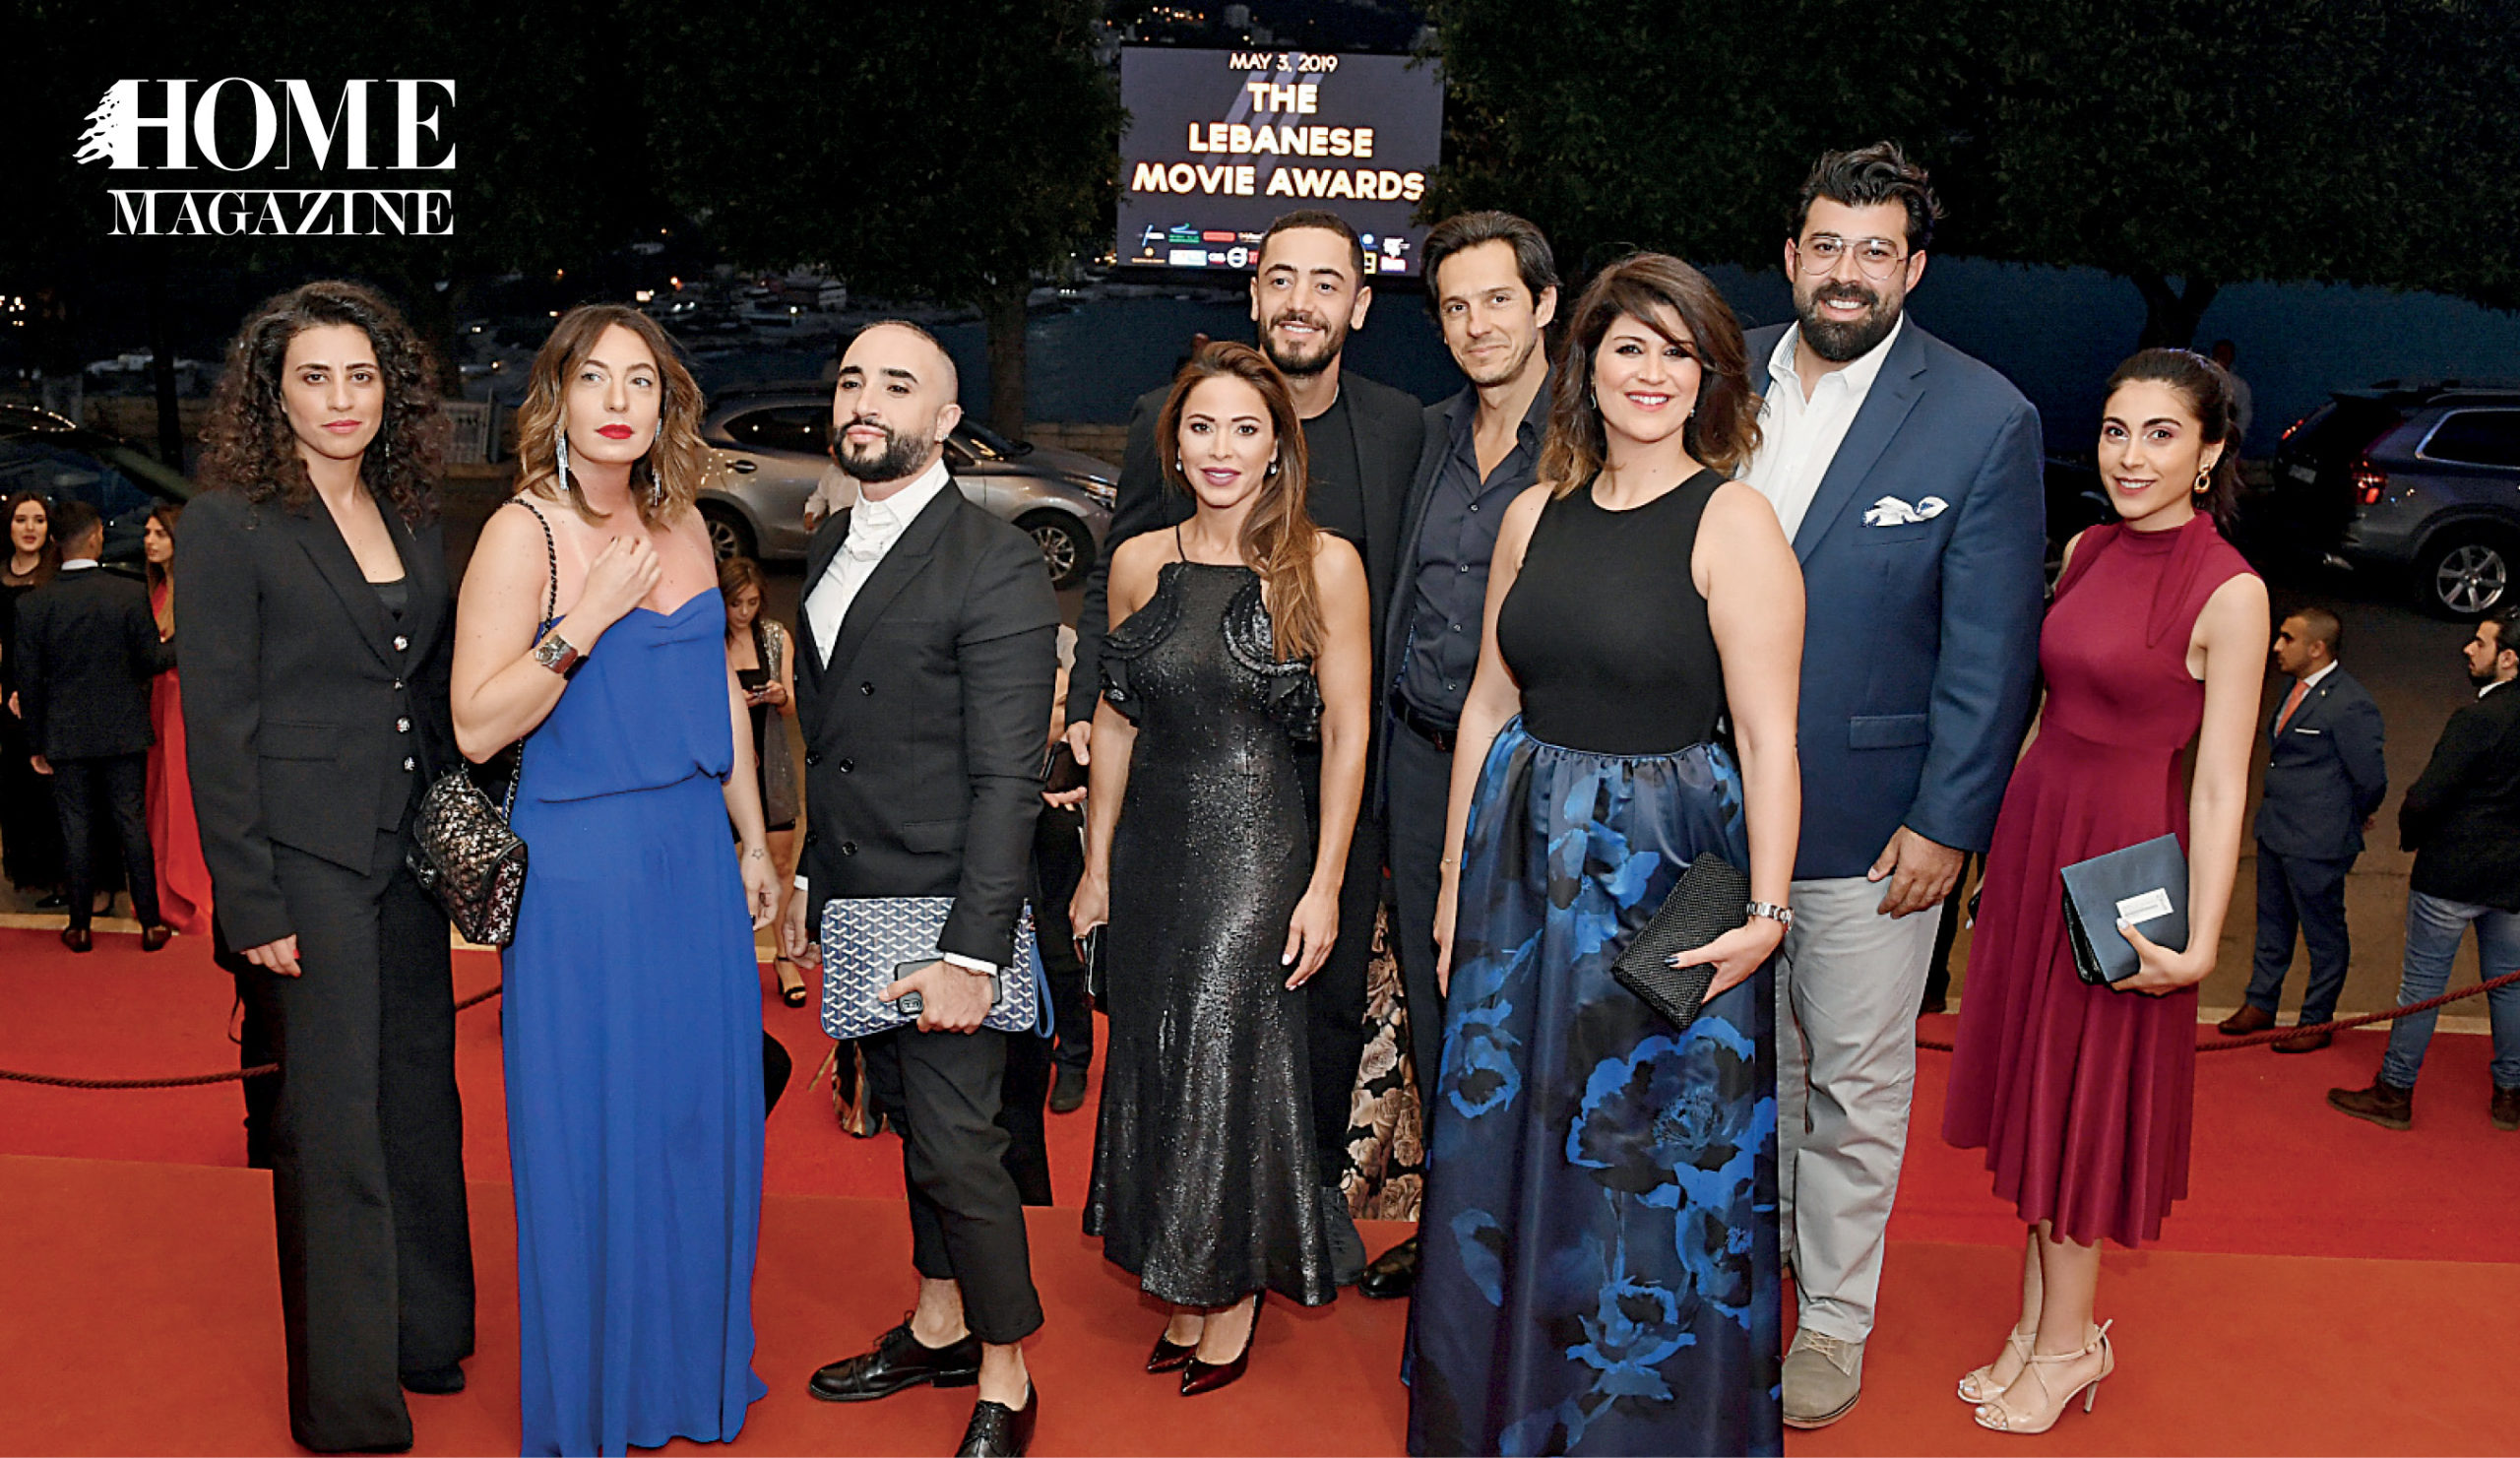 Group of men and women on red carpet in evening dresses and suits